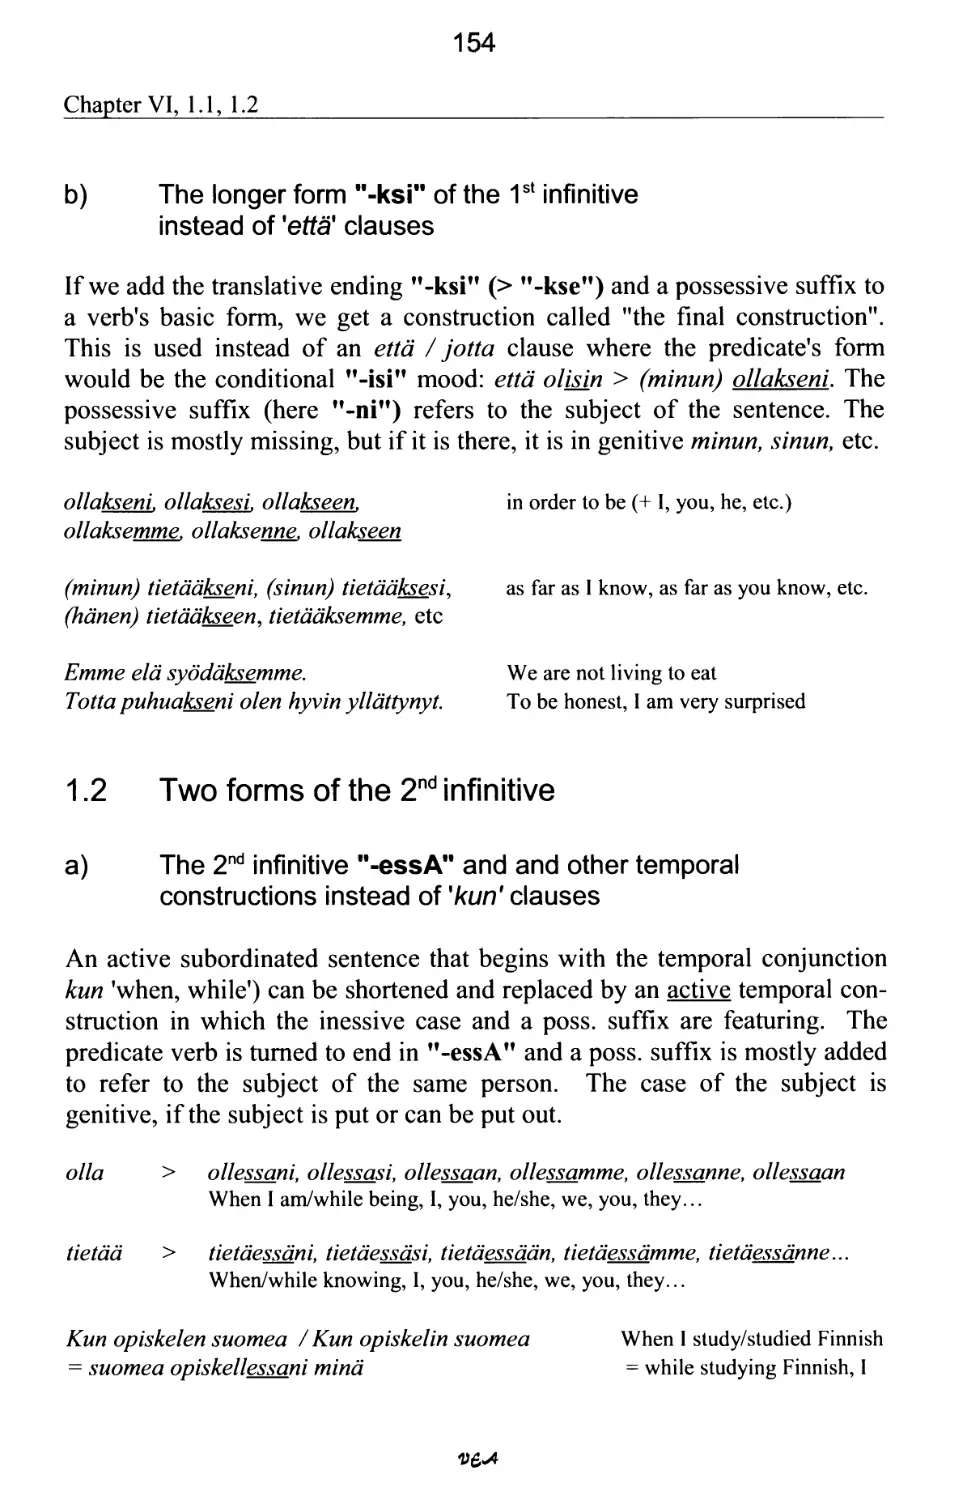 1.2 Two forms of the 2nd infinitive